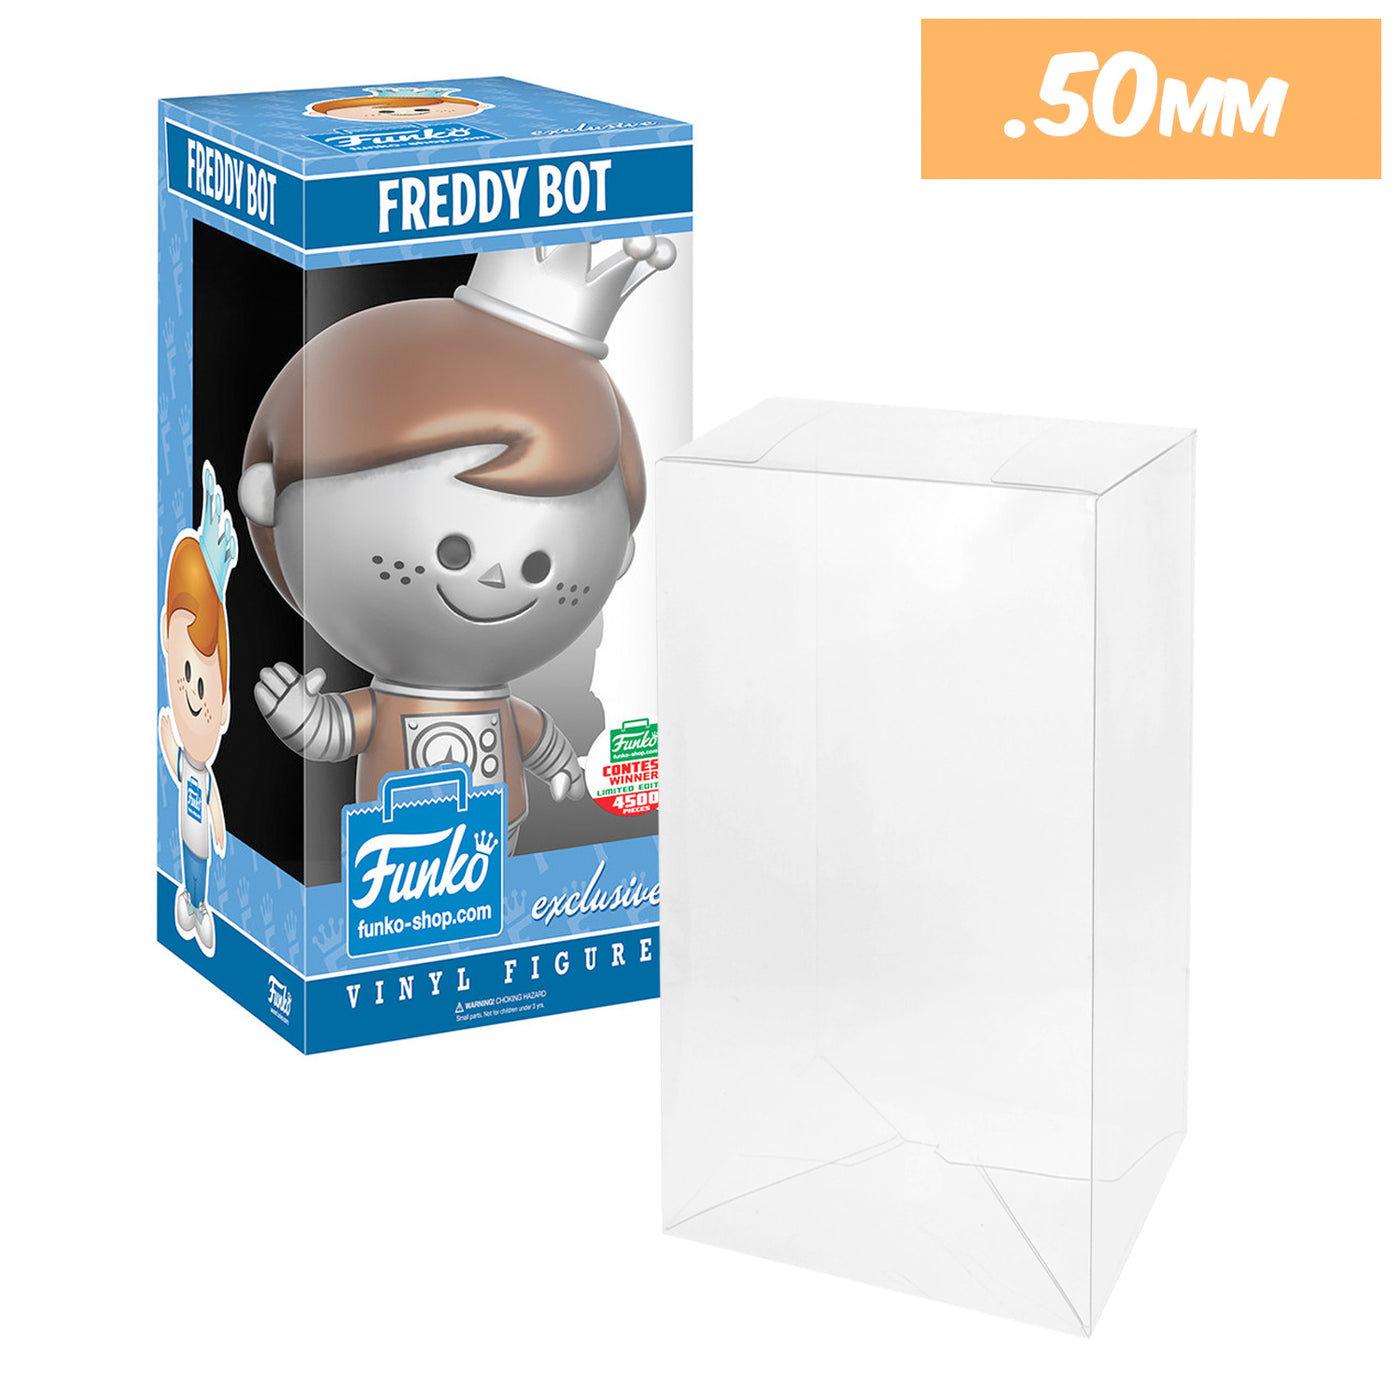 LARGE FREDDY FUNKO Pop Protectors for Funko (50mm thick) 8h x 5w x 5d